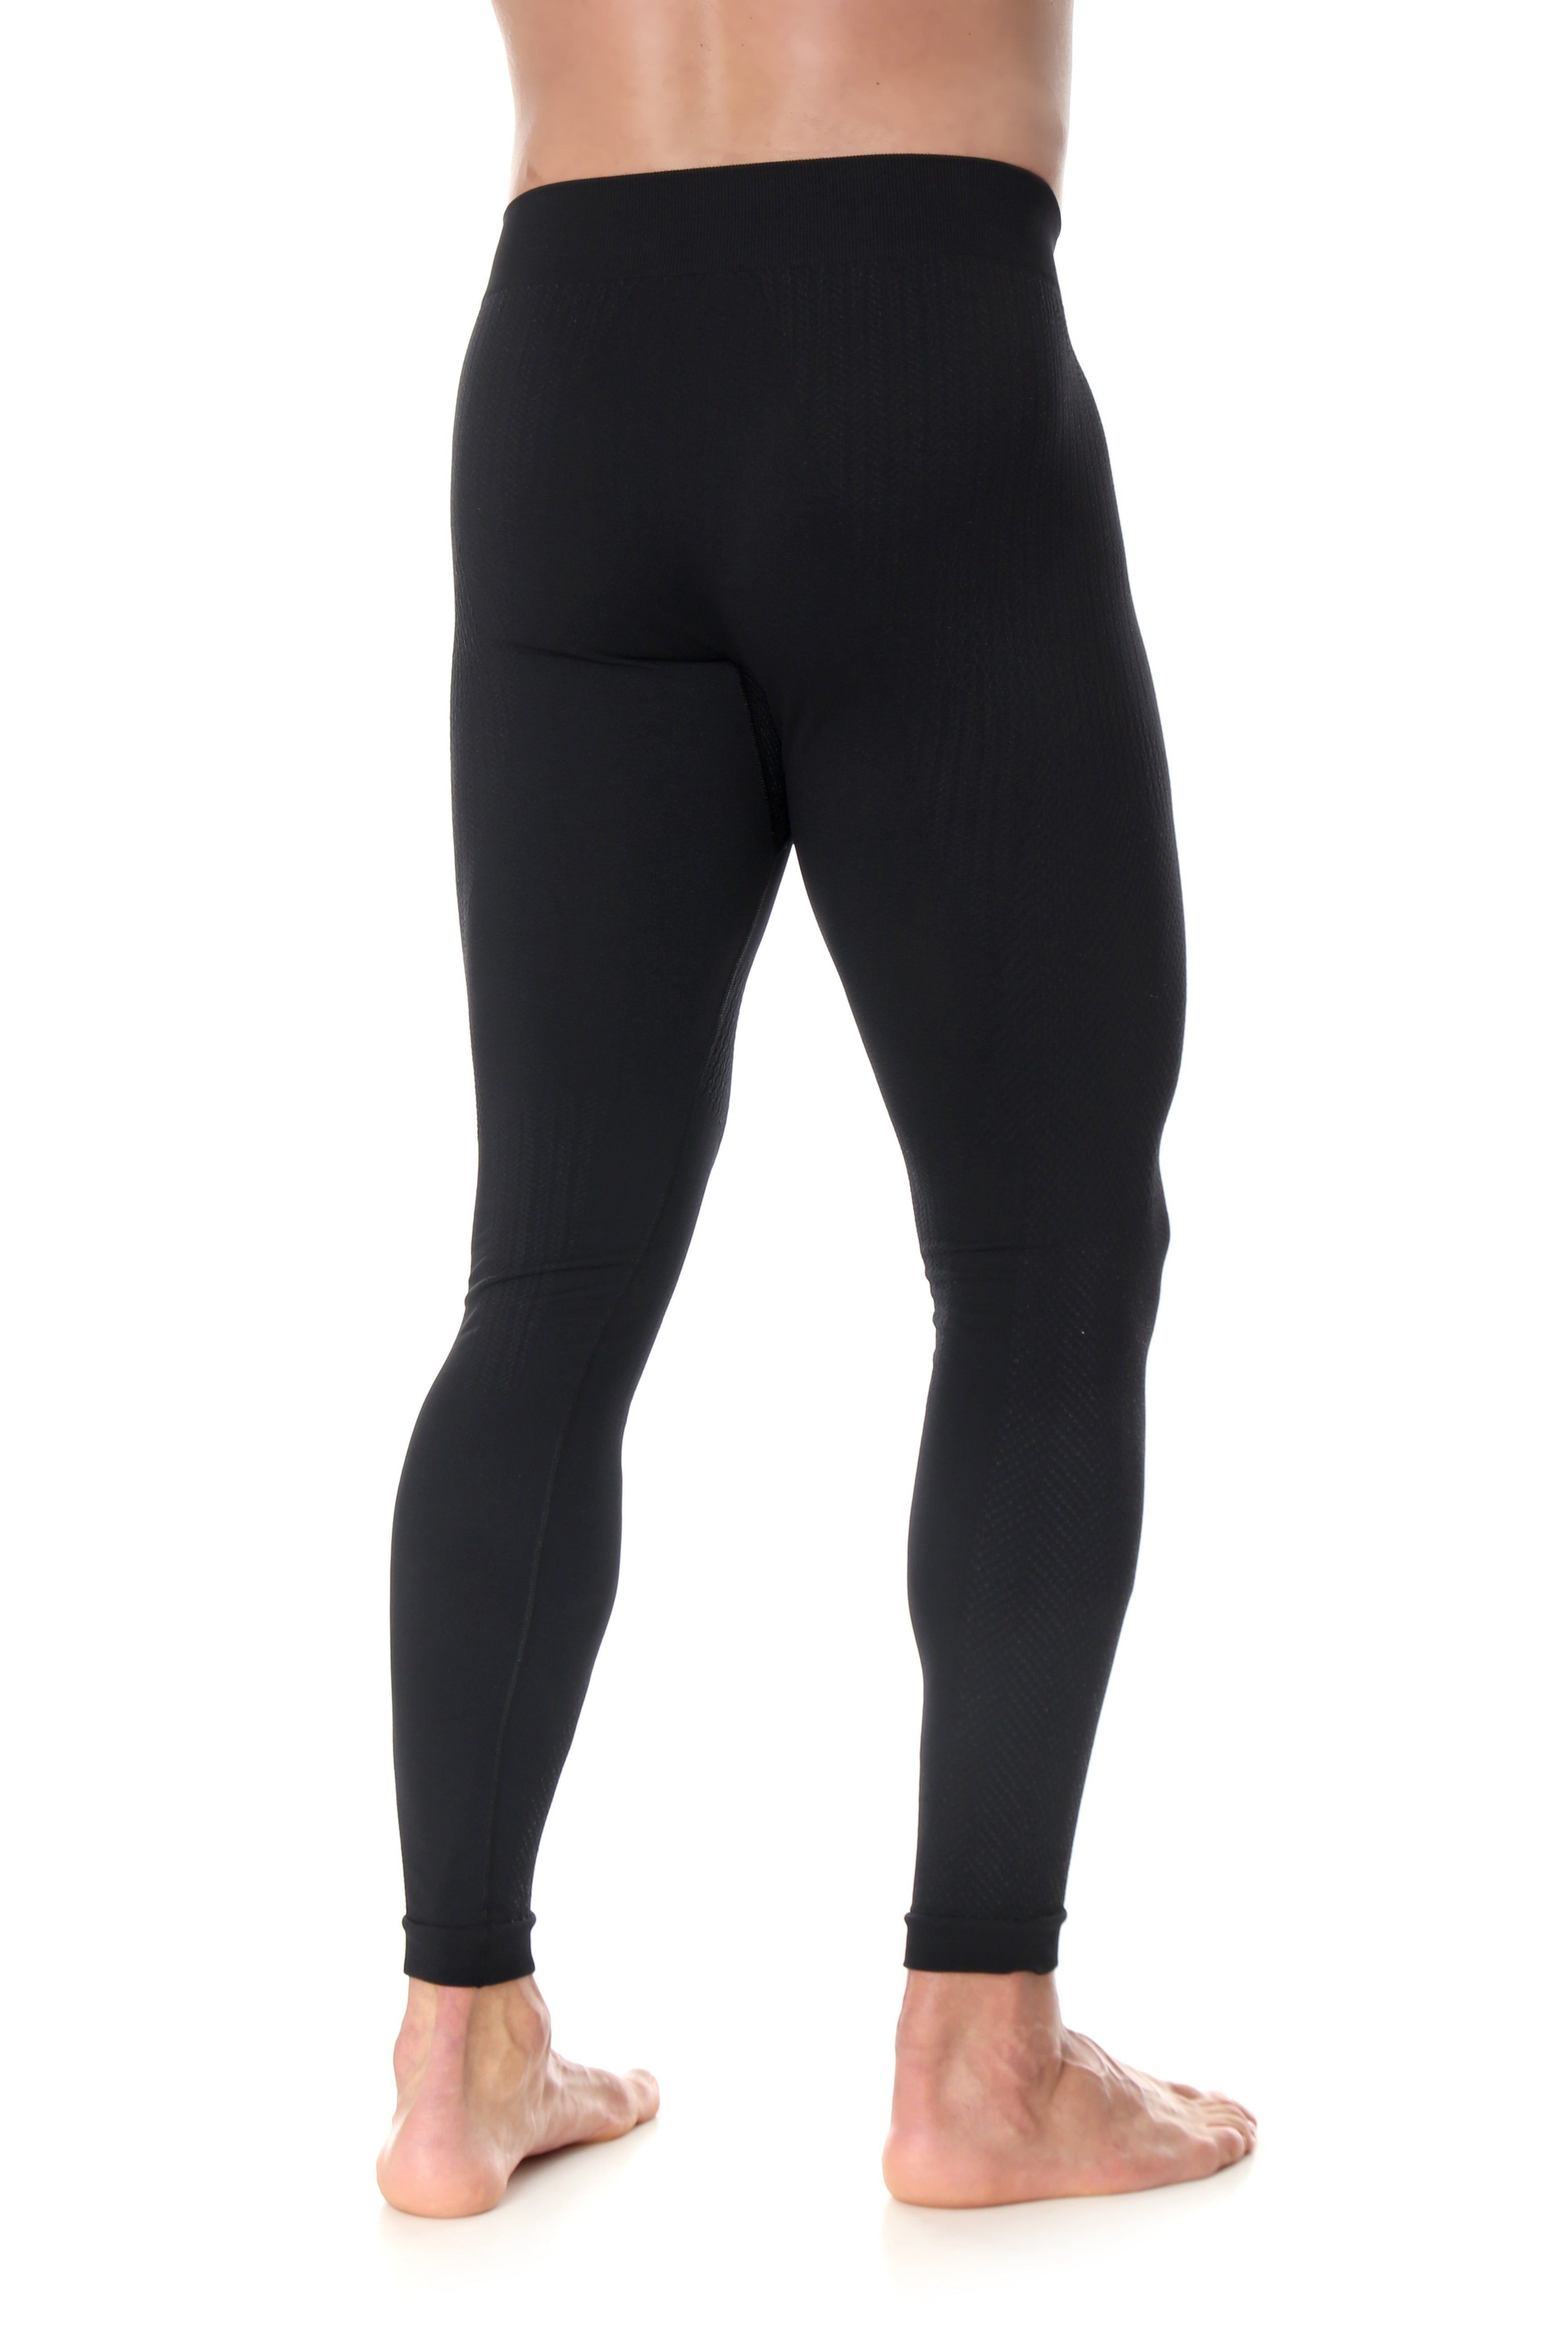 Men's Midweight Active Wear Extreme Thermo Leggings